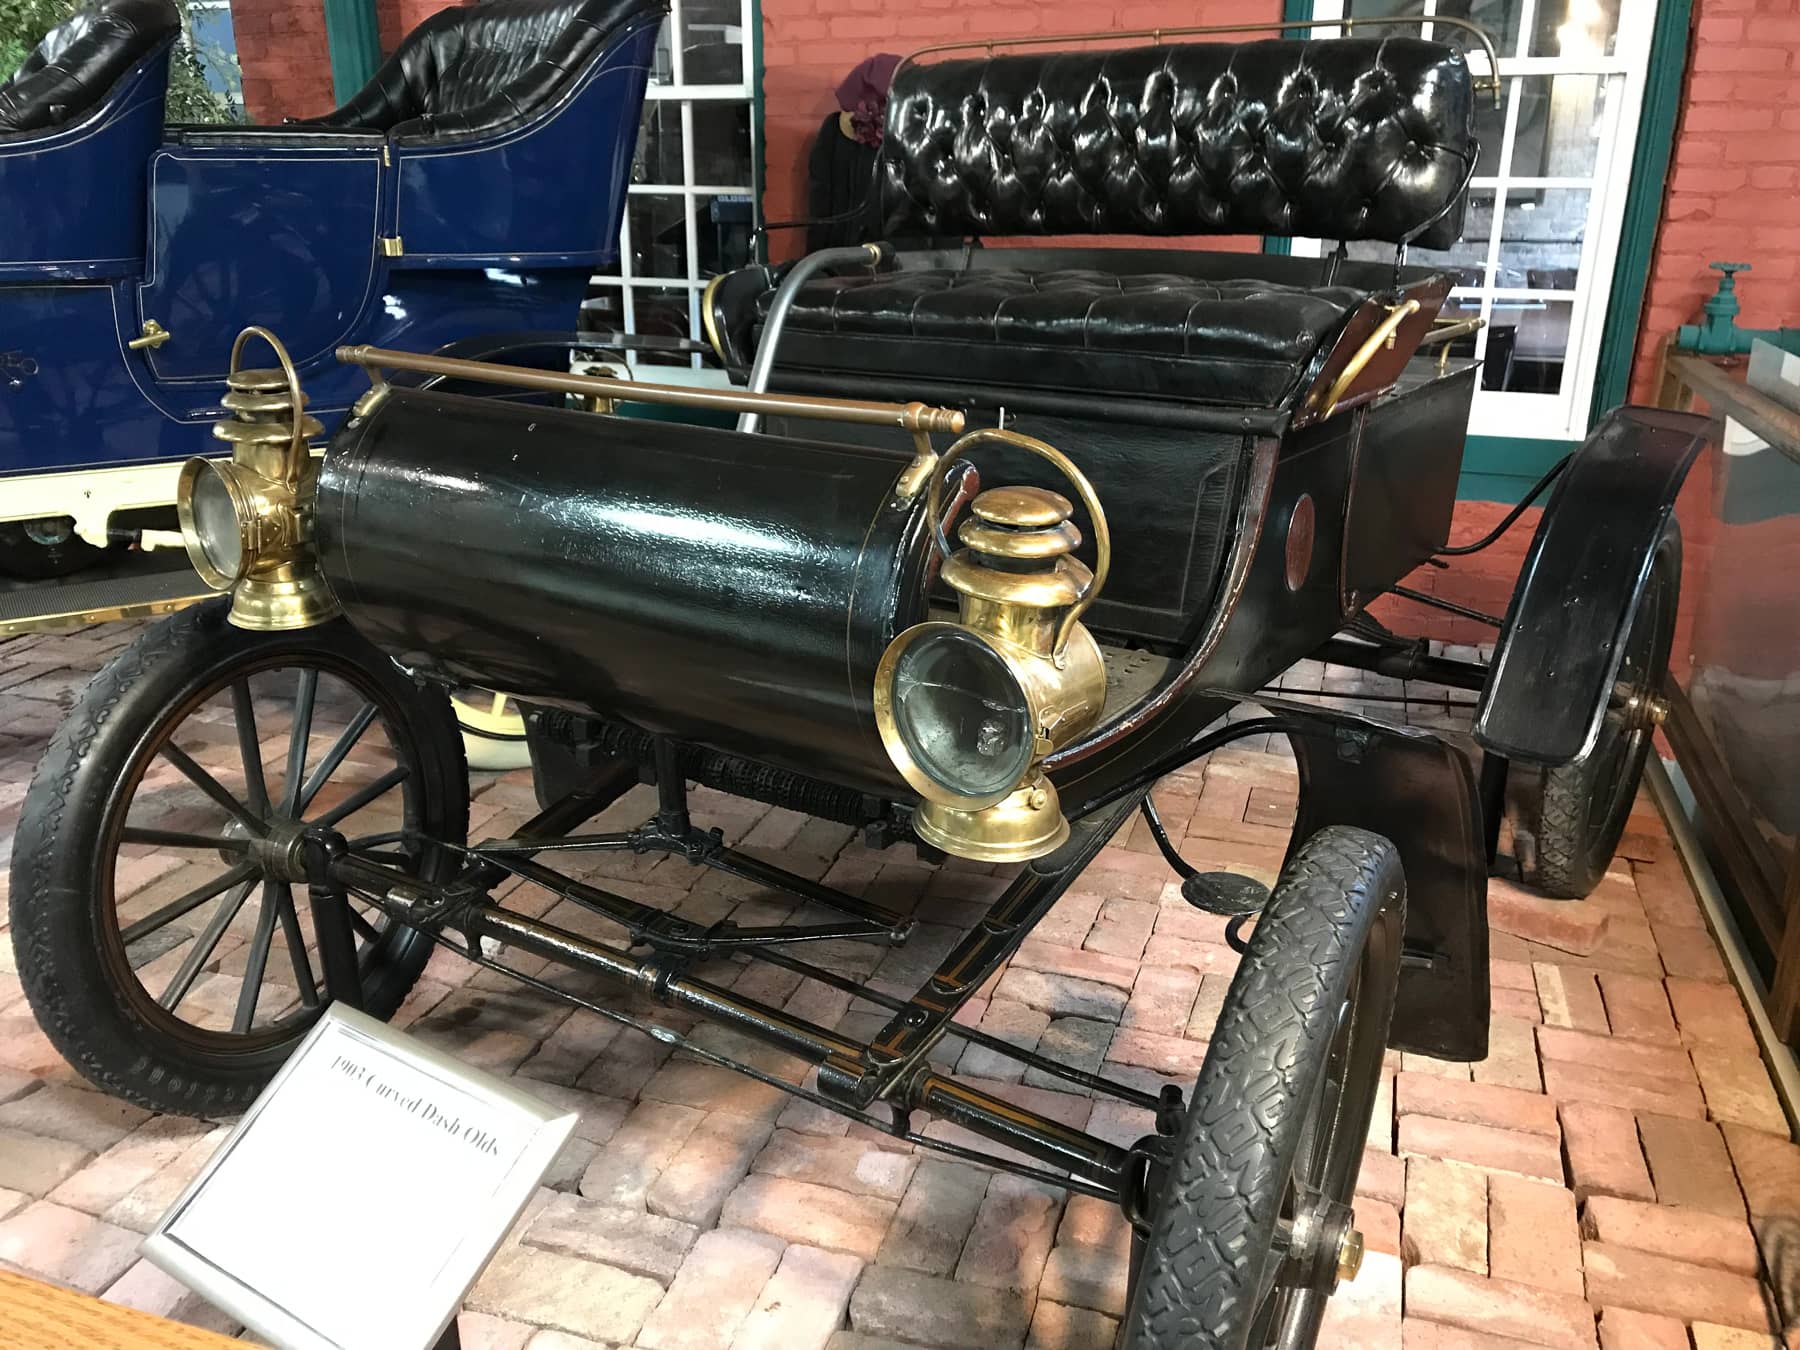 1903 Oldsmobile Curved Dash – Given to MSU by R.E. Olds himself and On Loan to REOTM